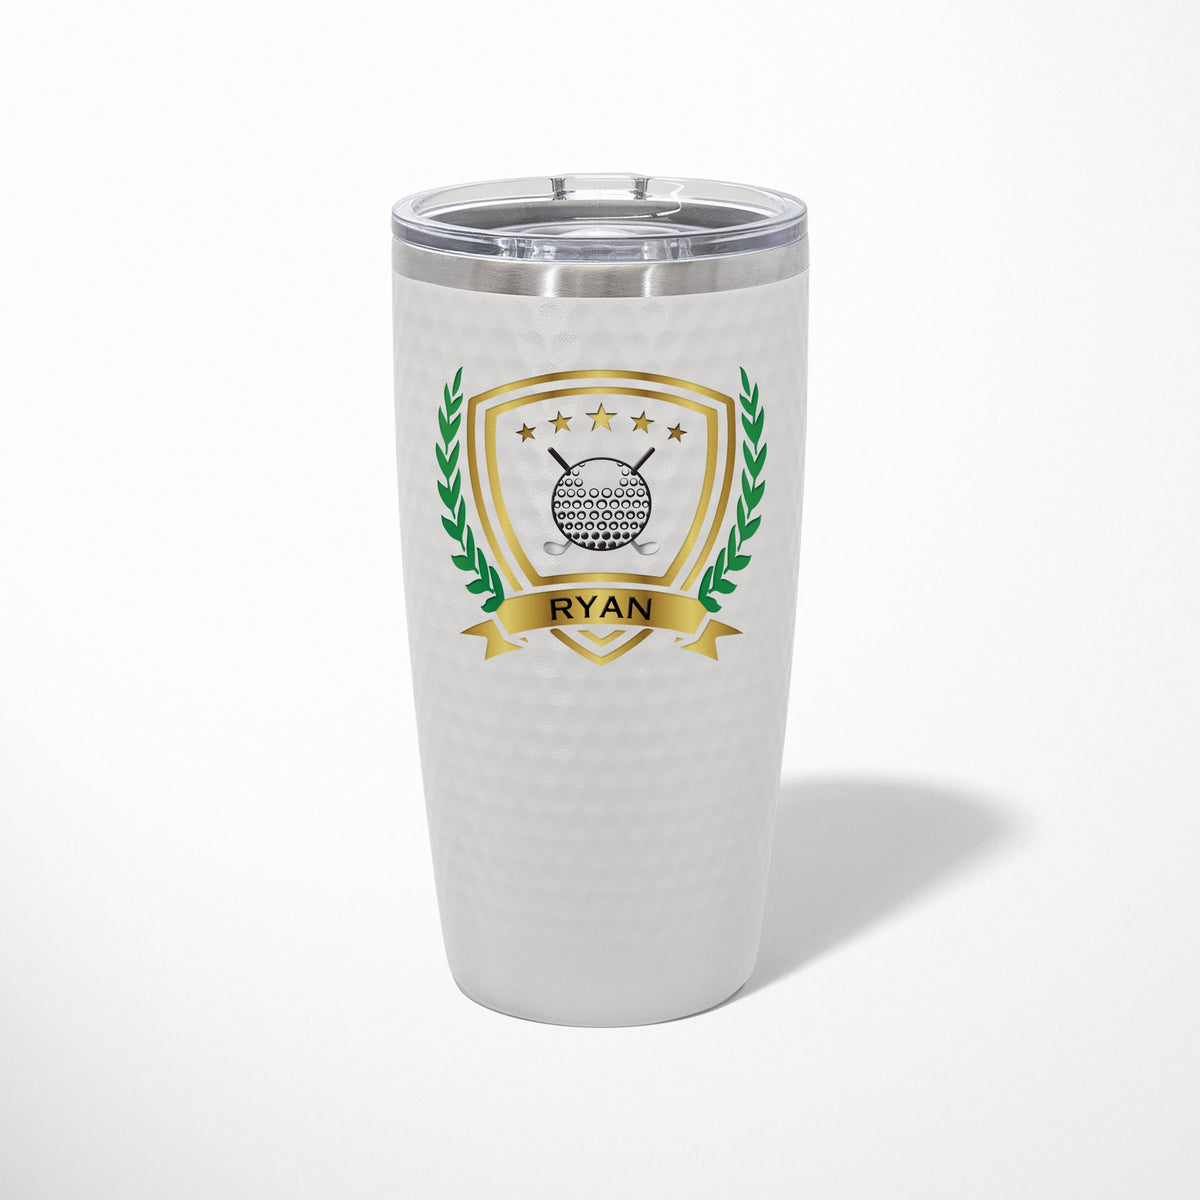 Golf ball dimpled tumbler personalized, Printed badge design personalized, Golf gift travel mug 20 oz. / Full color print